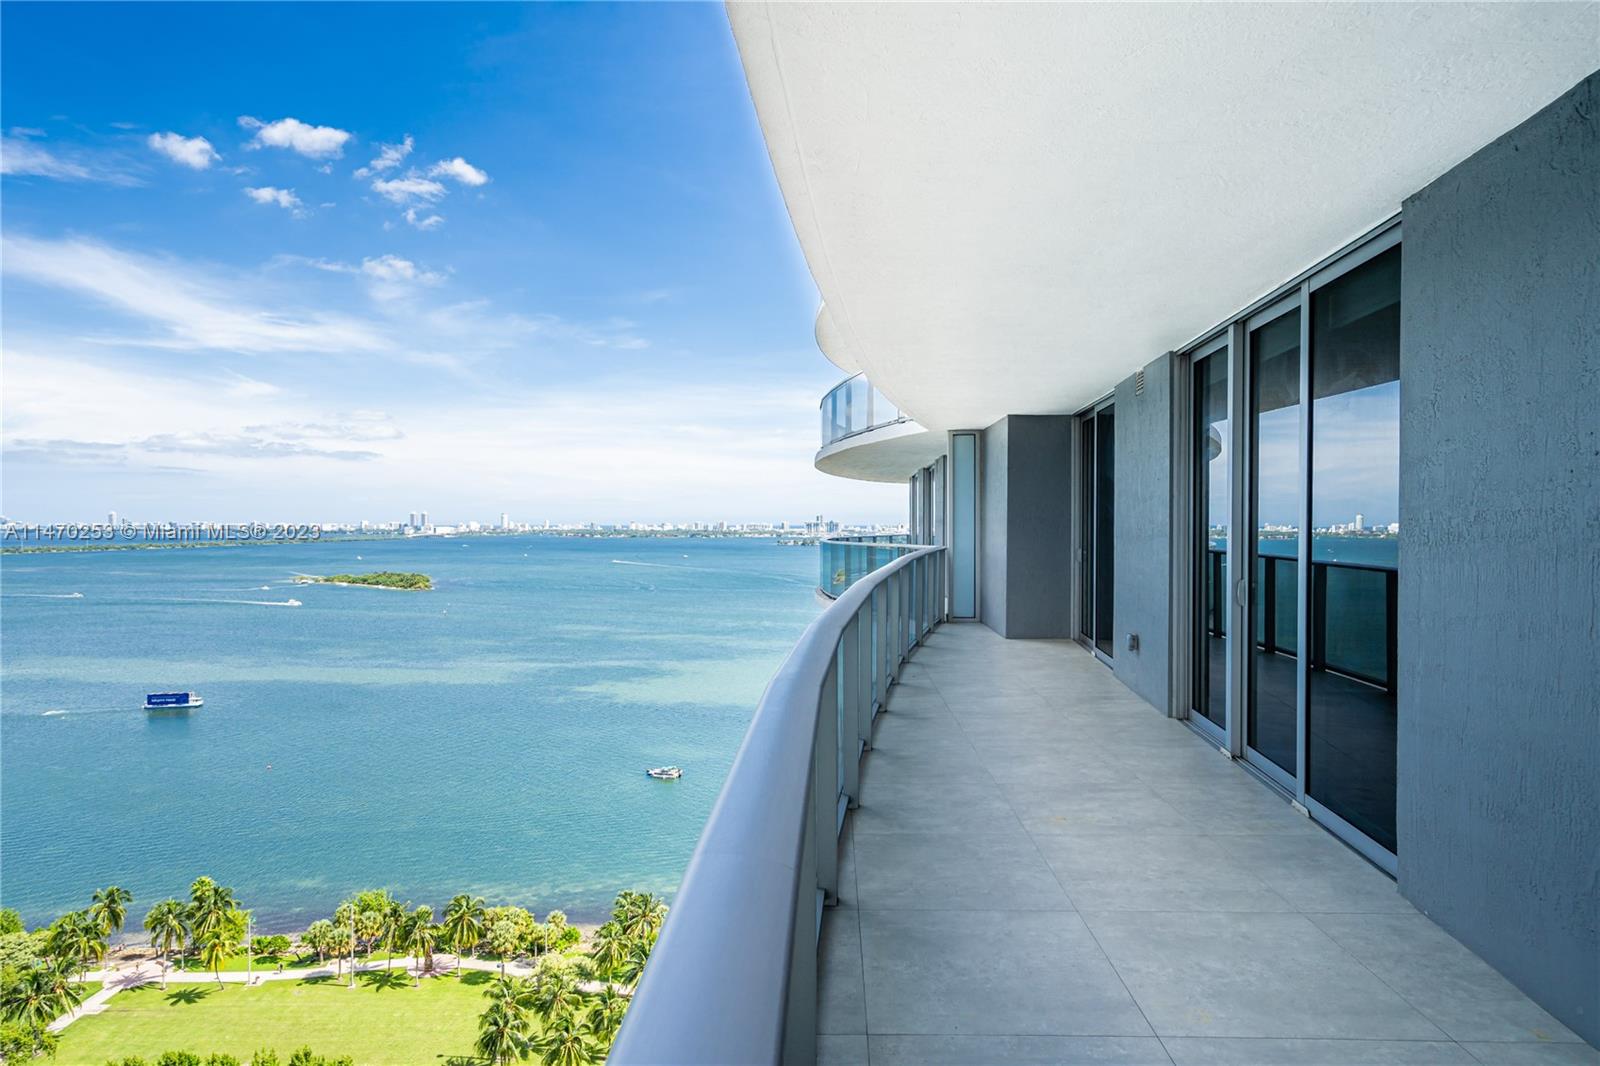 Enjoy beautiful partial bay views from this stunning 2BR + Den / 3 Baths with private elevator / foyer in luxurious Aria on the Bay. Split floor-plan unit equipped with top-of-the-line appliances and finishes, and spacious terrace. Amenities include 2 pools, gym, yoga studio, sauna, kids' room, theater room, game room, spa, lounge, conference rooms & more! 24/7 valet & security on site. Centrally located near Midtown, Downtown + Brickell, Miami Beach & more. Steps away from bay, park, and other recreational activities.